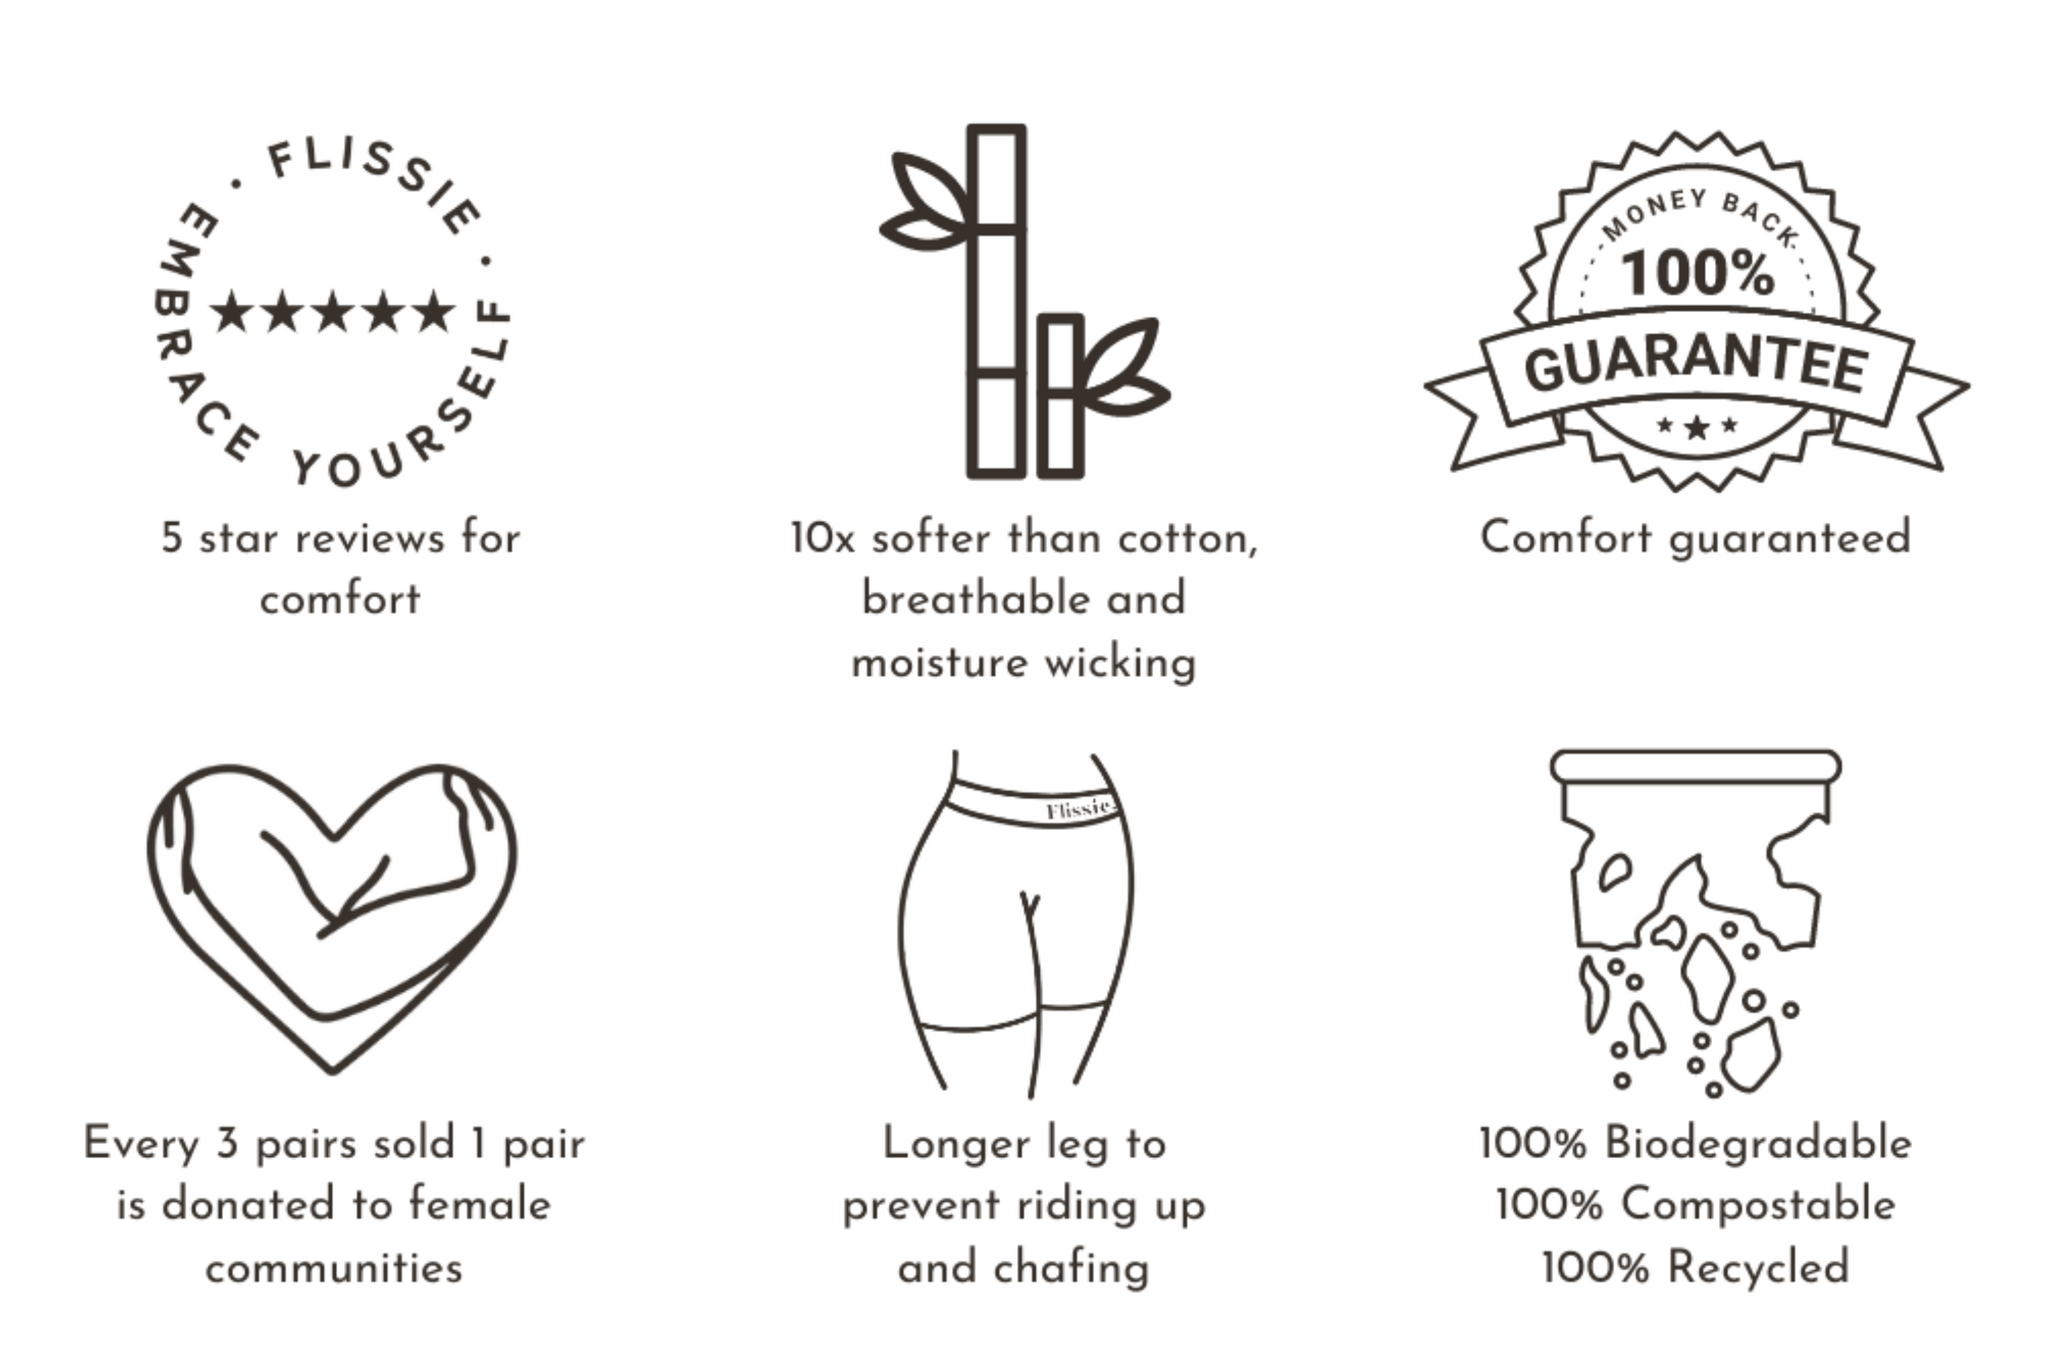 The features and benefits of purchasing Flissie womens Boxers